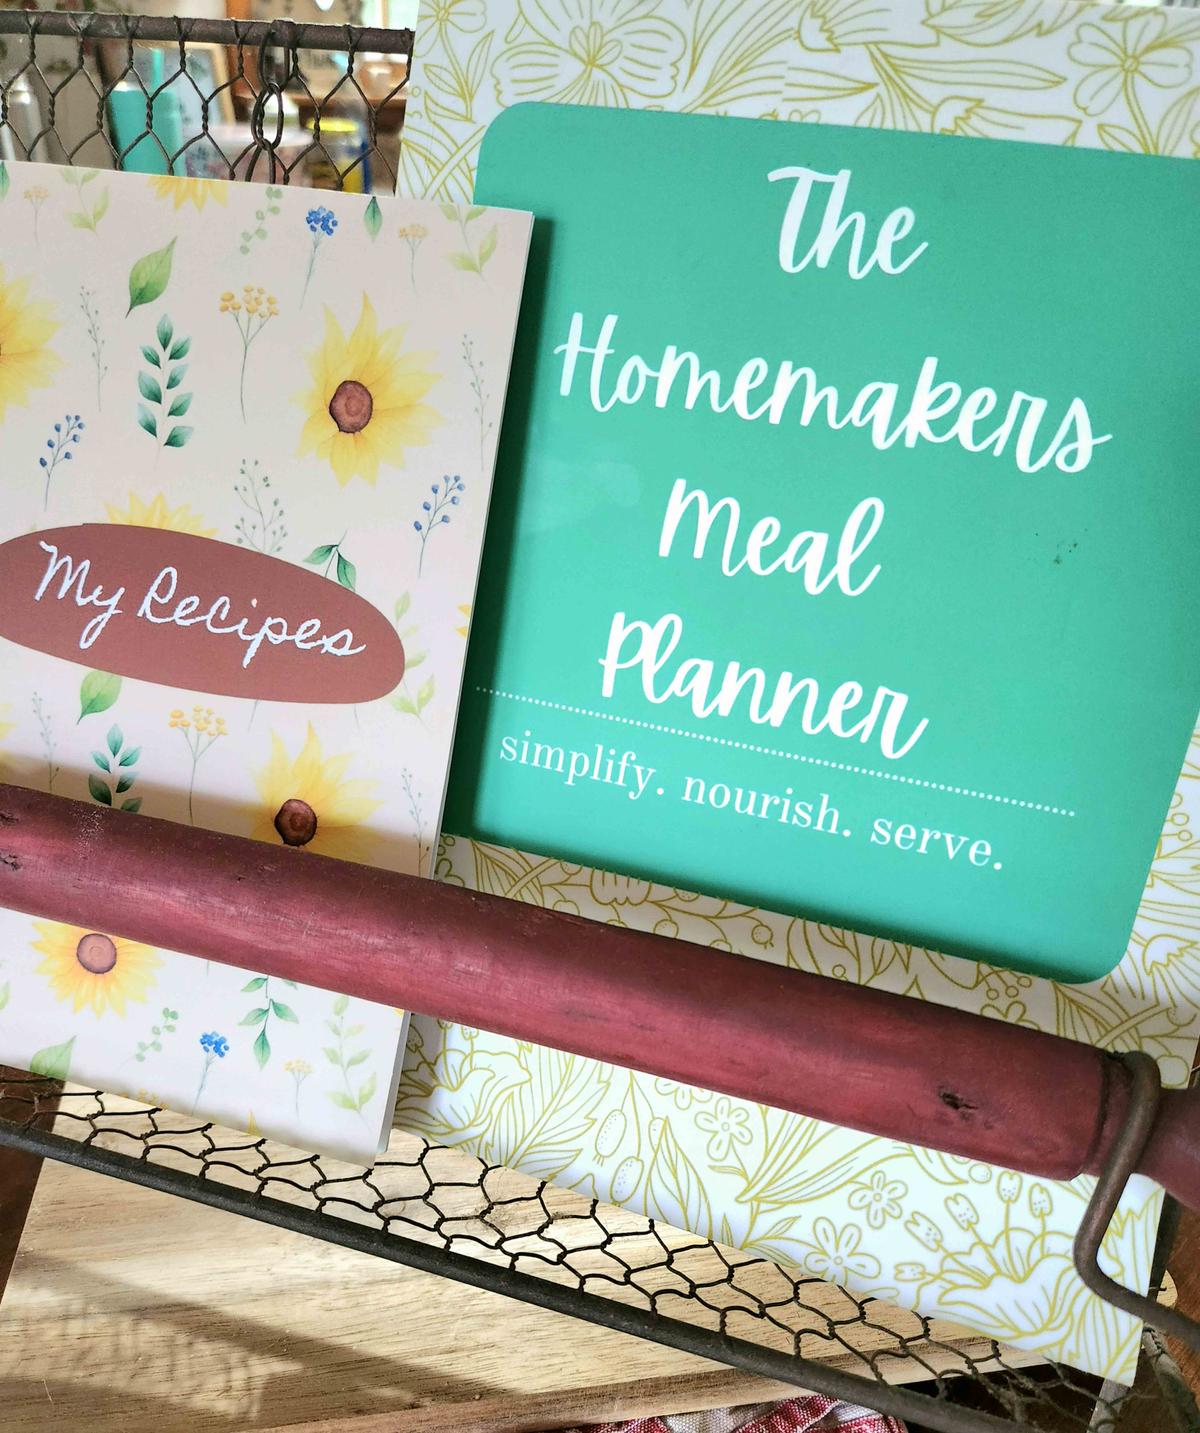  Several homemaking recipe books in Shelby Lancaster's home. (Courtesy of Shelby Lancaster)